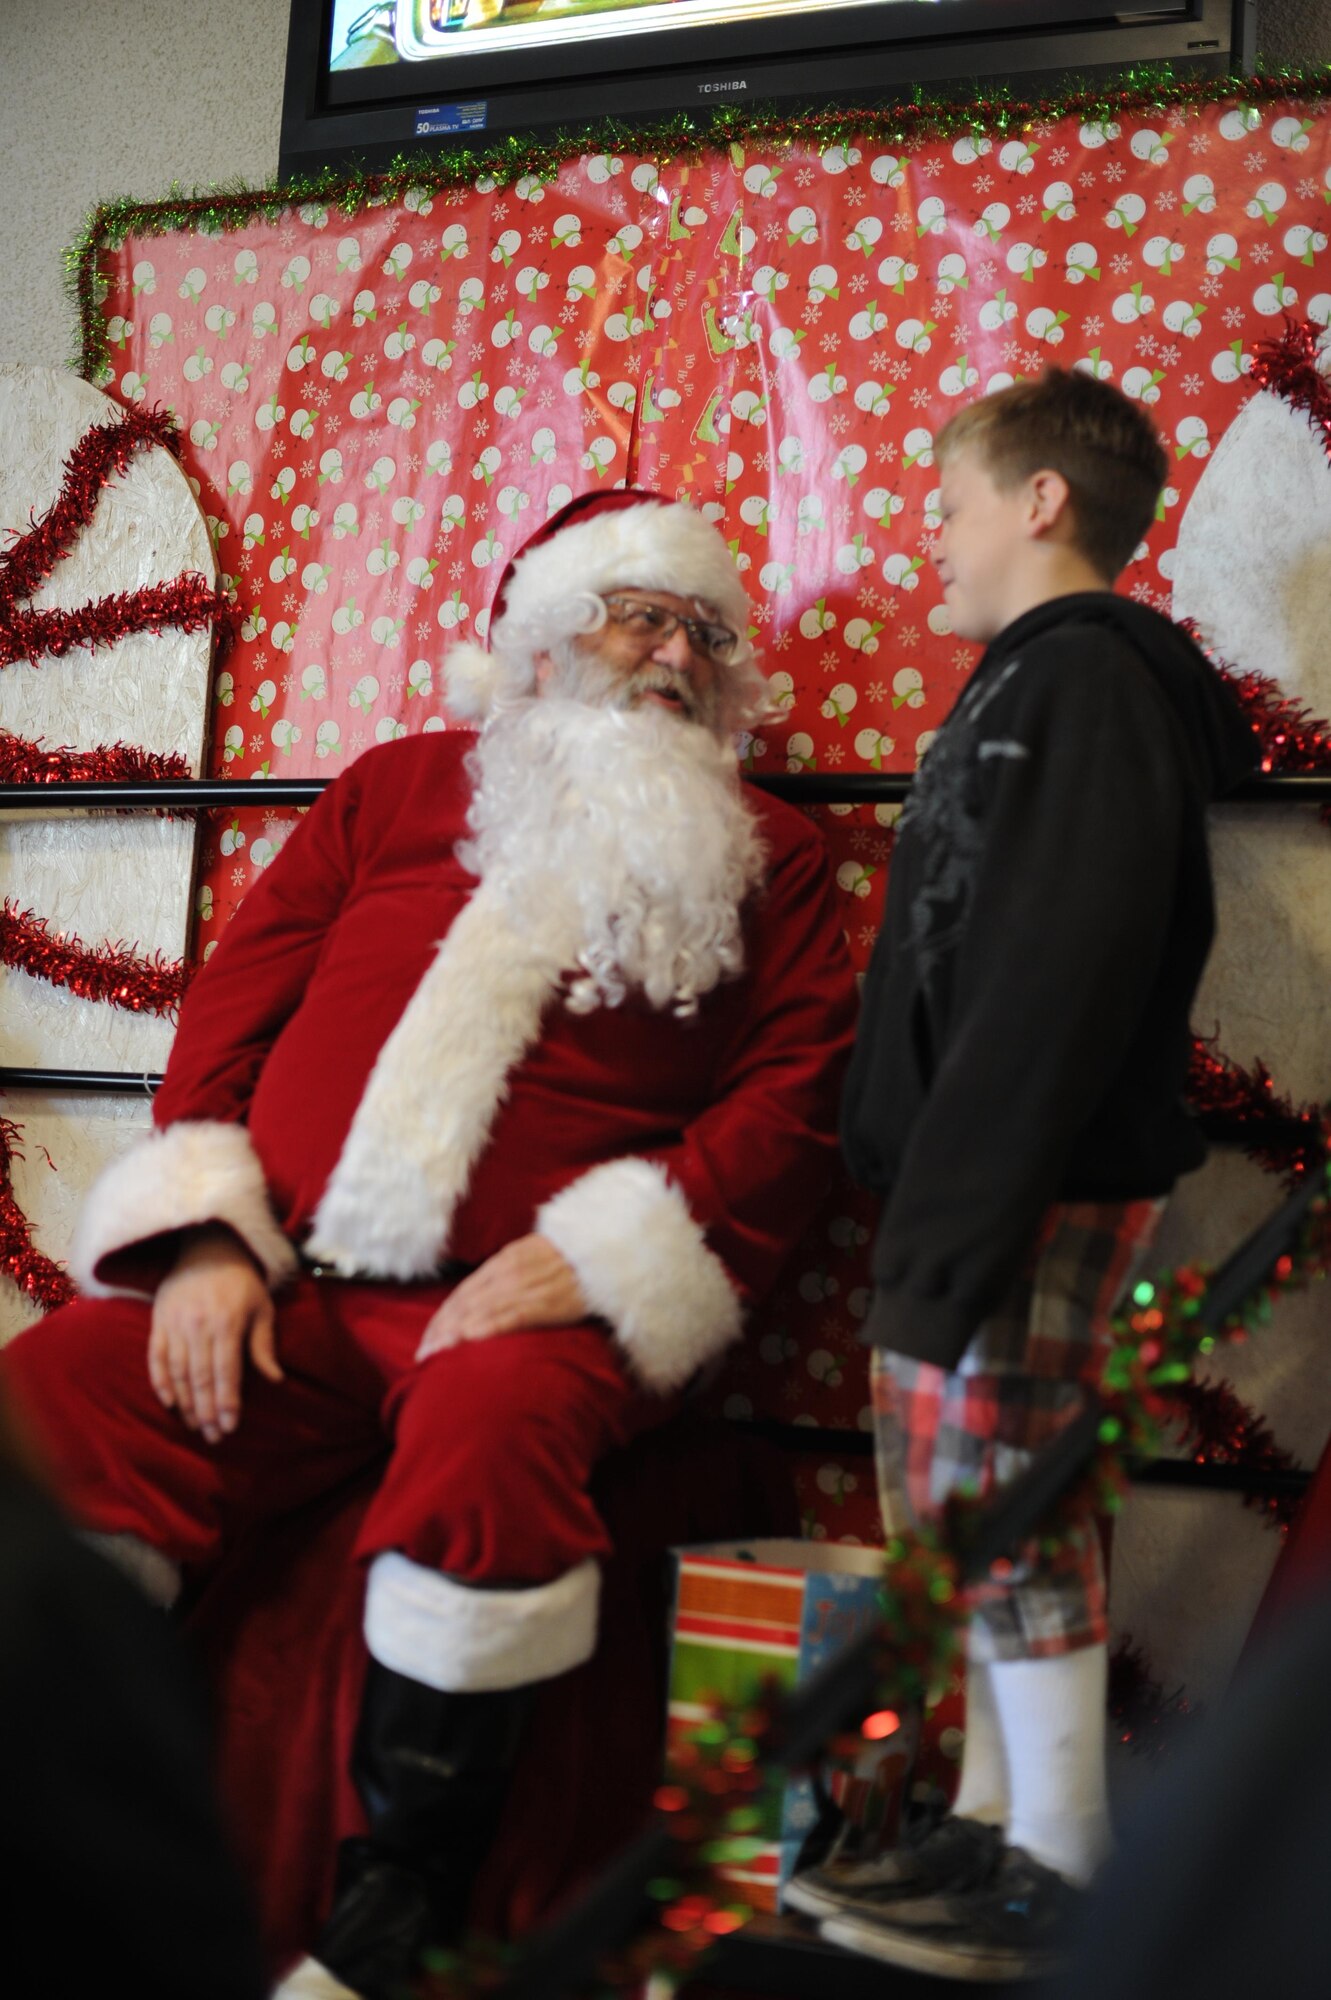 A boy talks with Santa Claus Dec. 20, 2016, at Cedar Lane Elementary School in Olivehurst, California. Marysville Joint Unified School District’s homeless students and their families had the chance to visit with Santa Claus and receive free food and presents. (U.S. Air Force photo by Senior Airman Tara R. Abrahams)